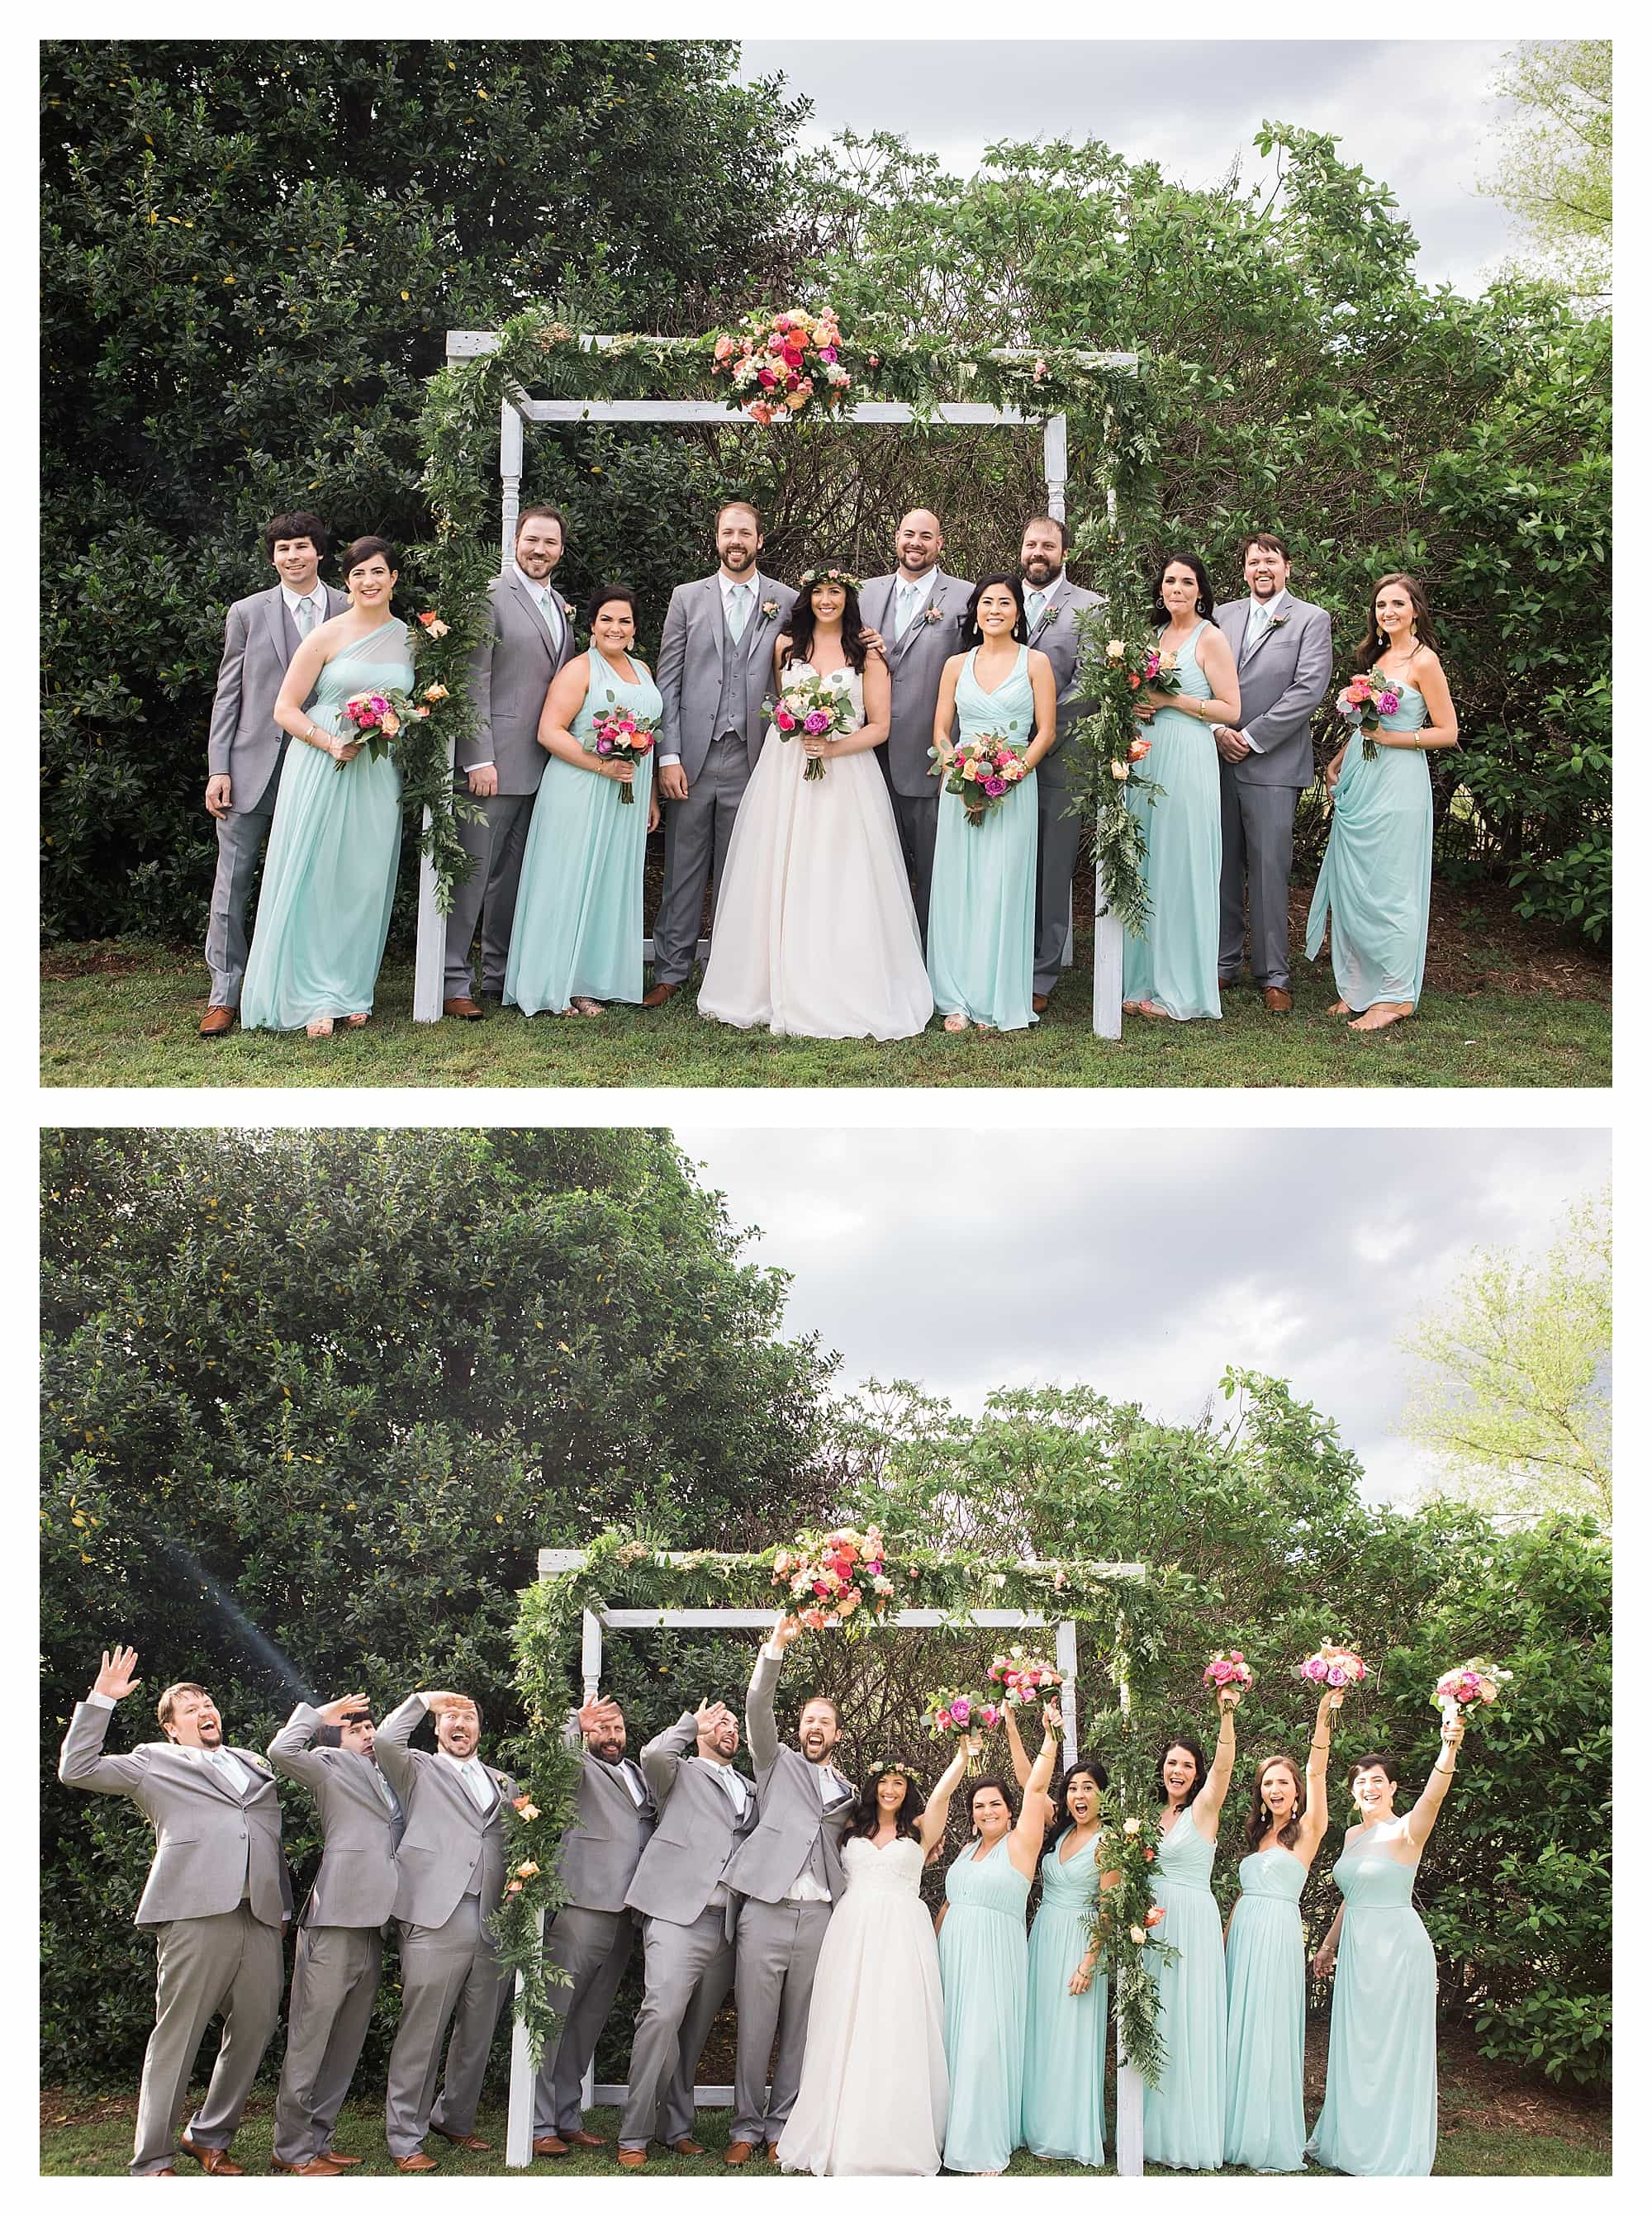 Bridal party at outdoor ceremony Lake Lure NC, wedding photographers Kathy Beaver Photography